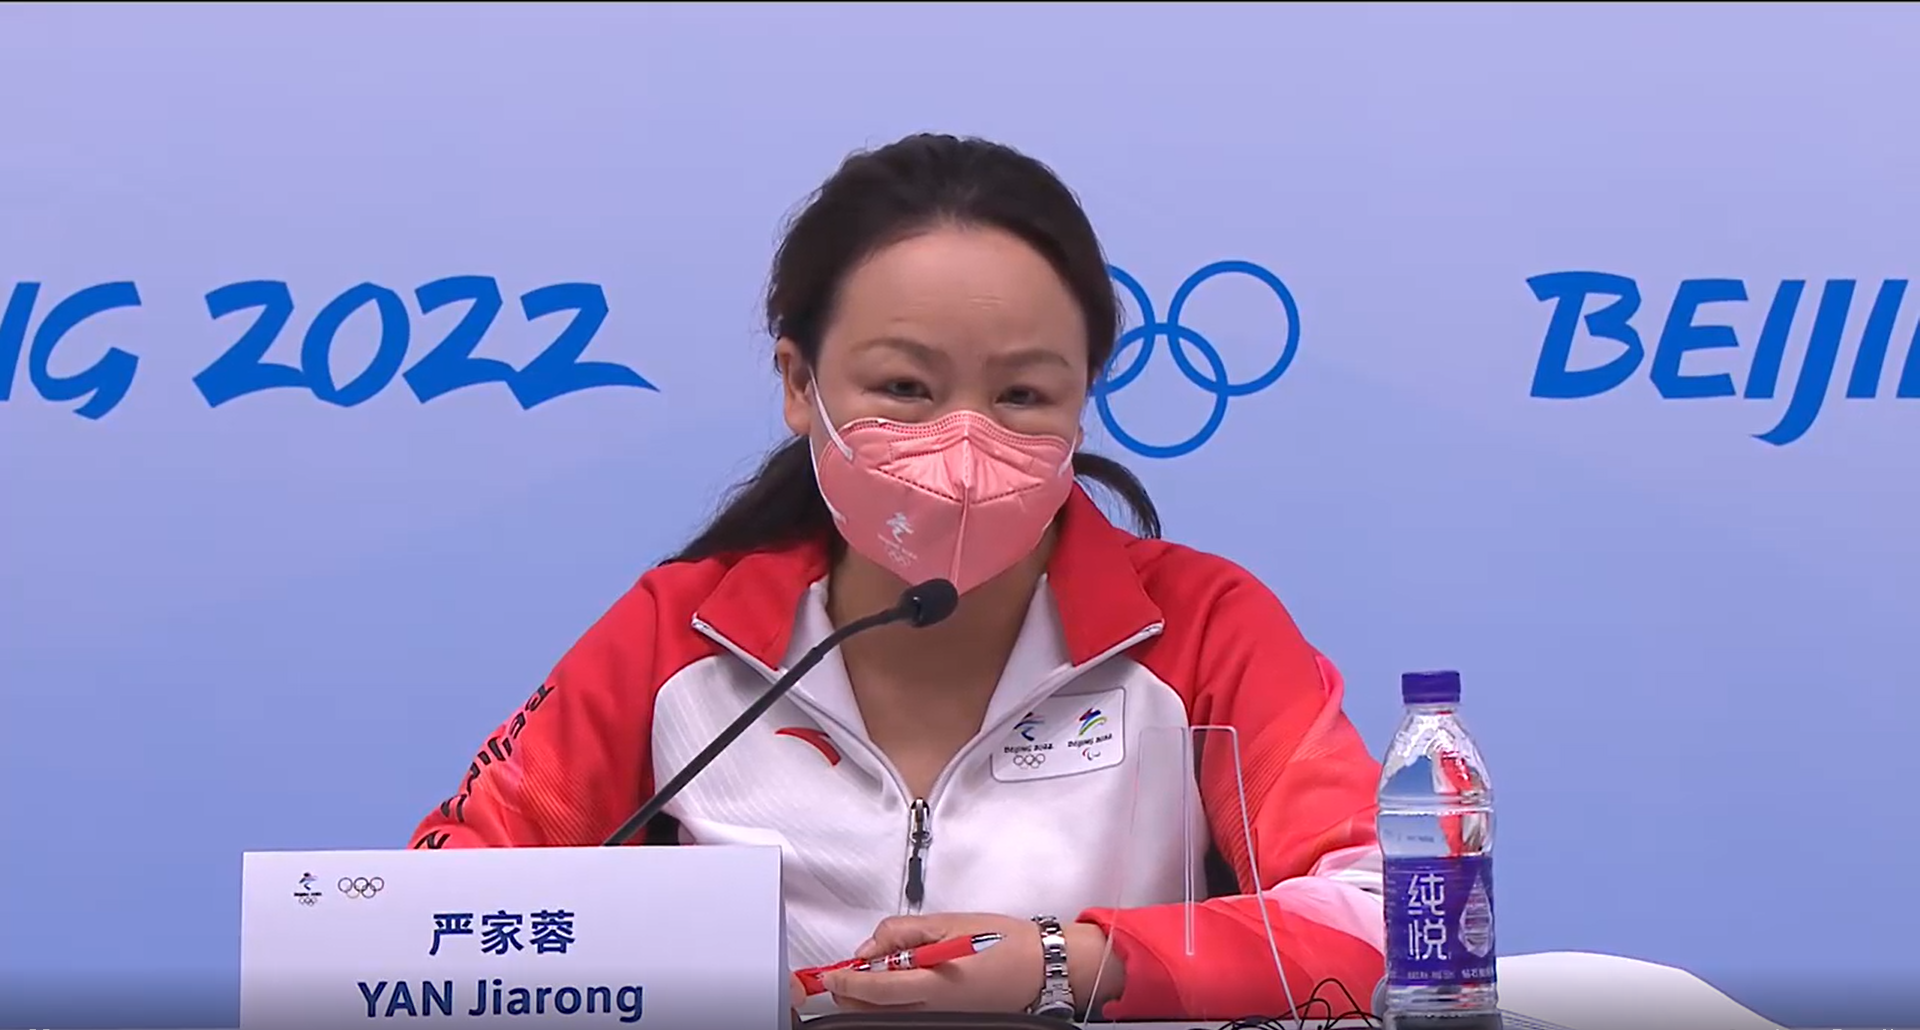 Beijing 2022 spokesperson dismisses Xinjiang "lies" and promotes One China policy in remarkable press conference